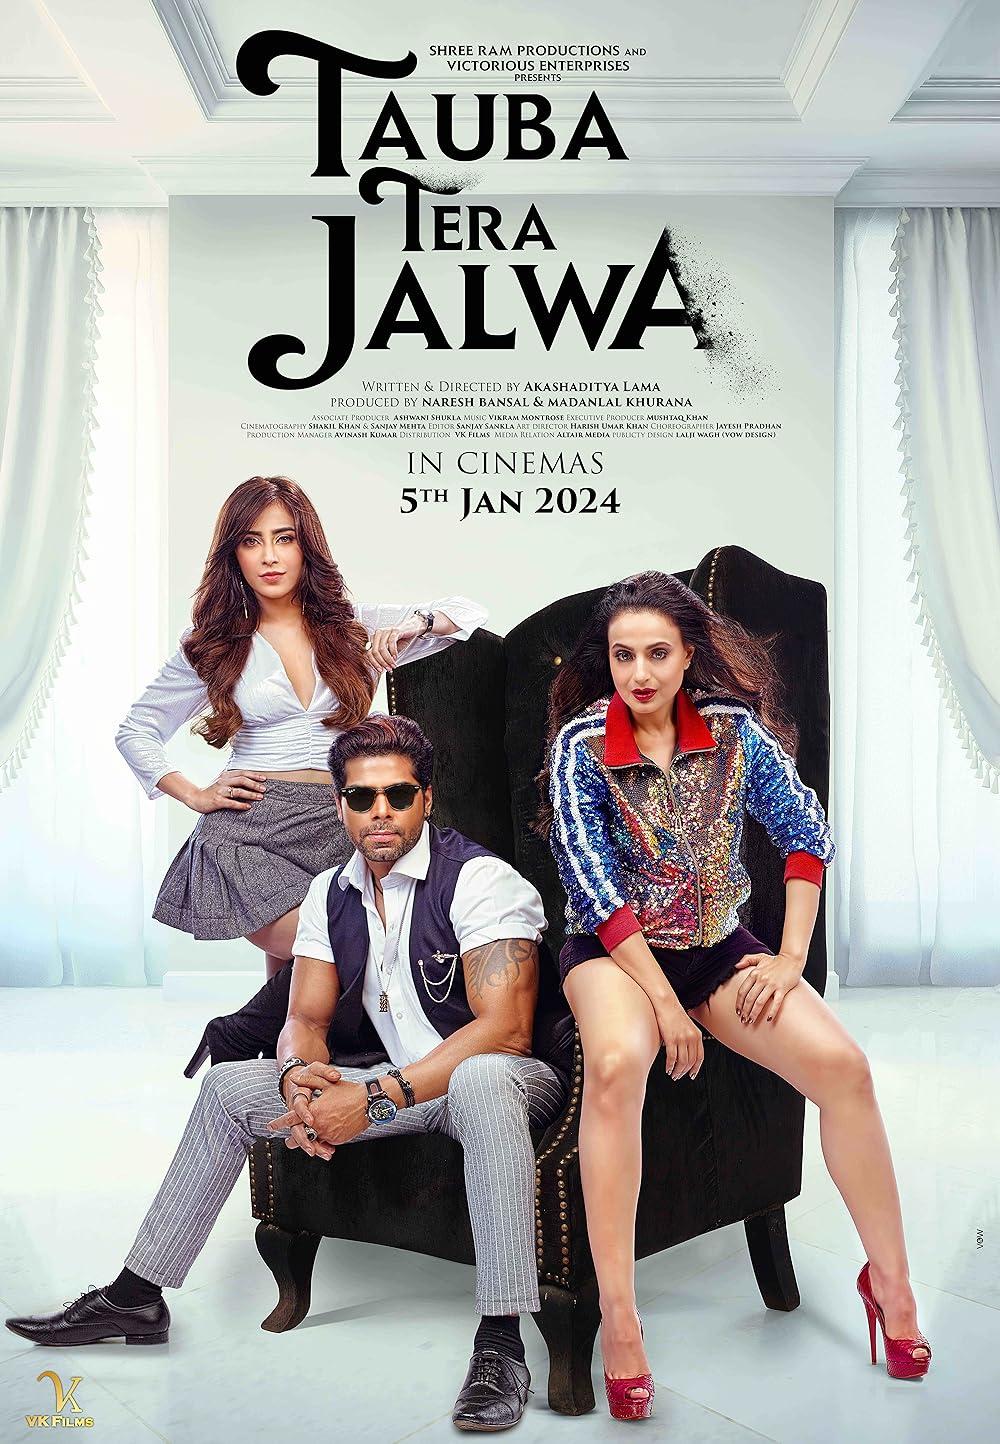 Tauba Tera JalwaWritten and directed by Akashaditya Lama, 'Tauba Tera Jalwa' featuring Ameesha Patel, Rajesh Sharma, and Ehsan Khan is anticipated to weave a story that revolves around redemption and fascination.